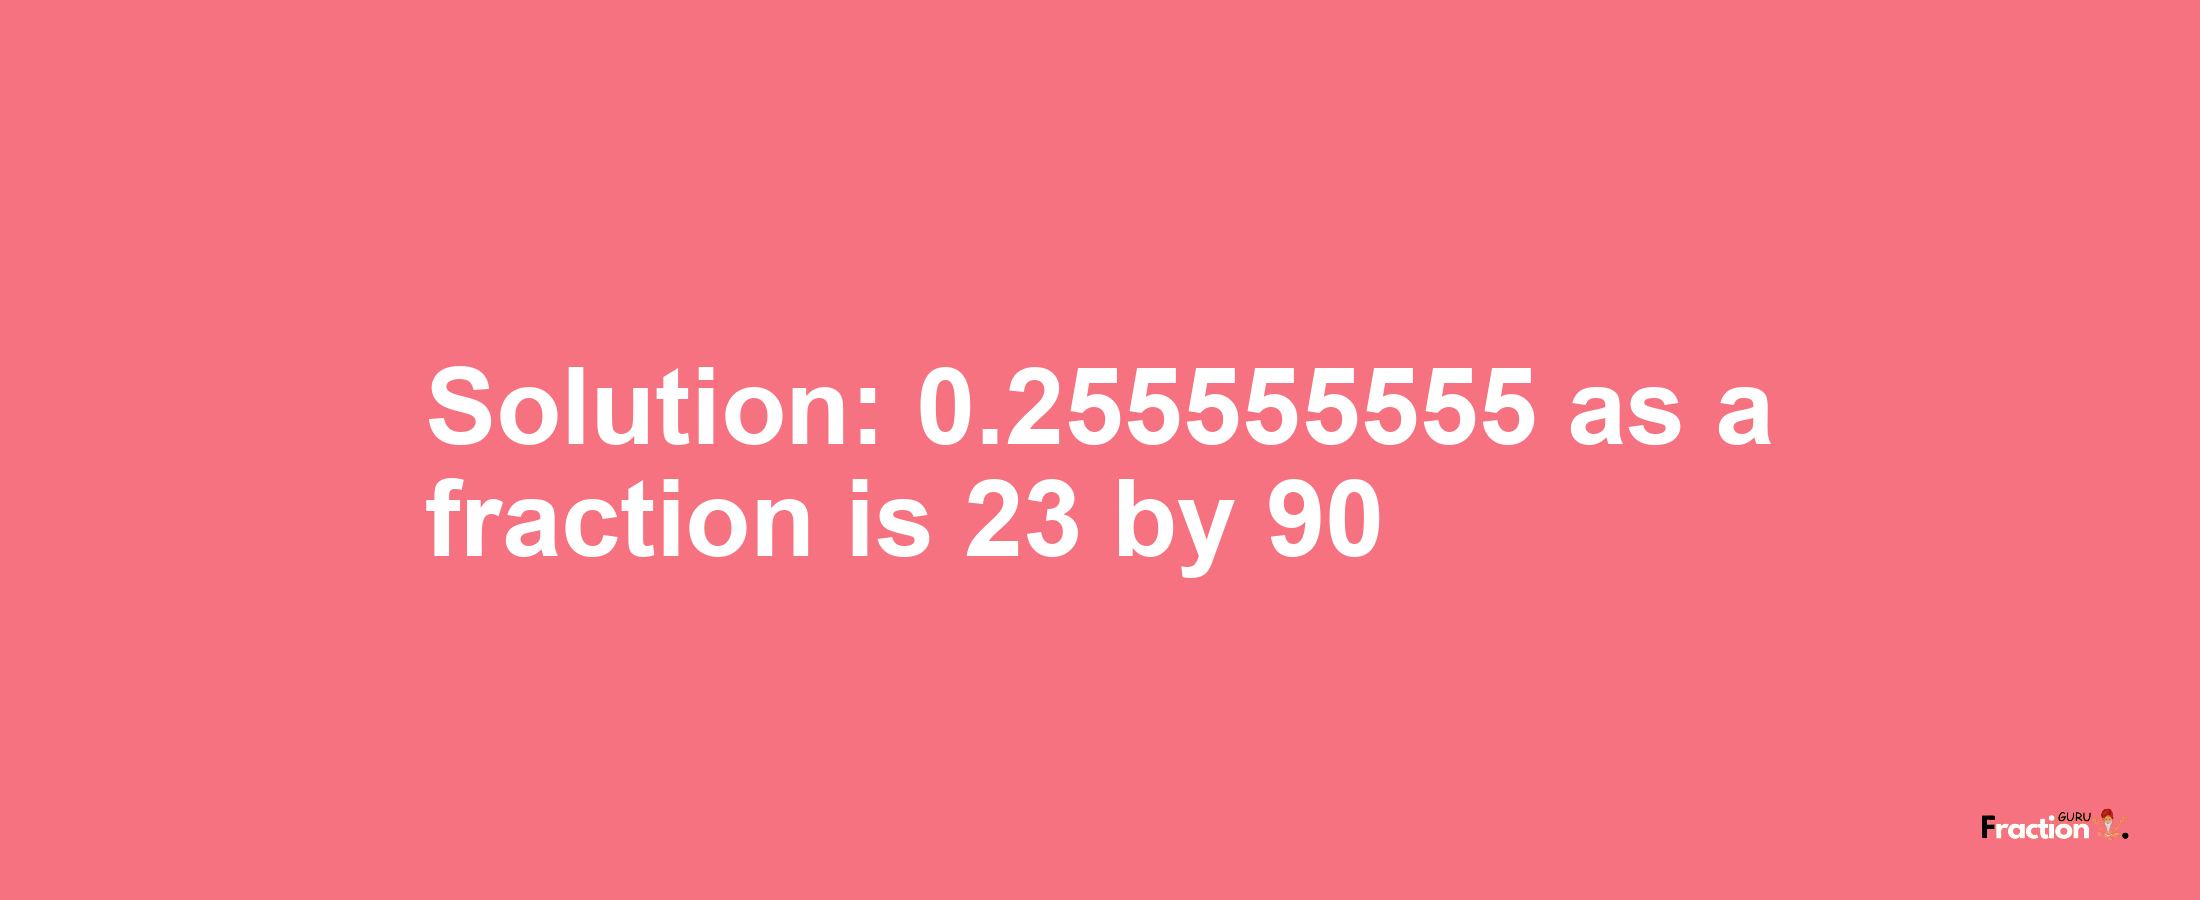 Solution:0.255555555 as a fraction is 23/90